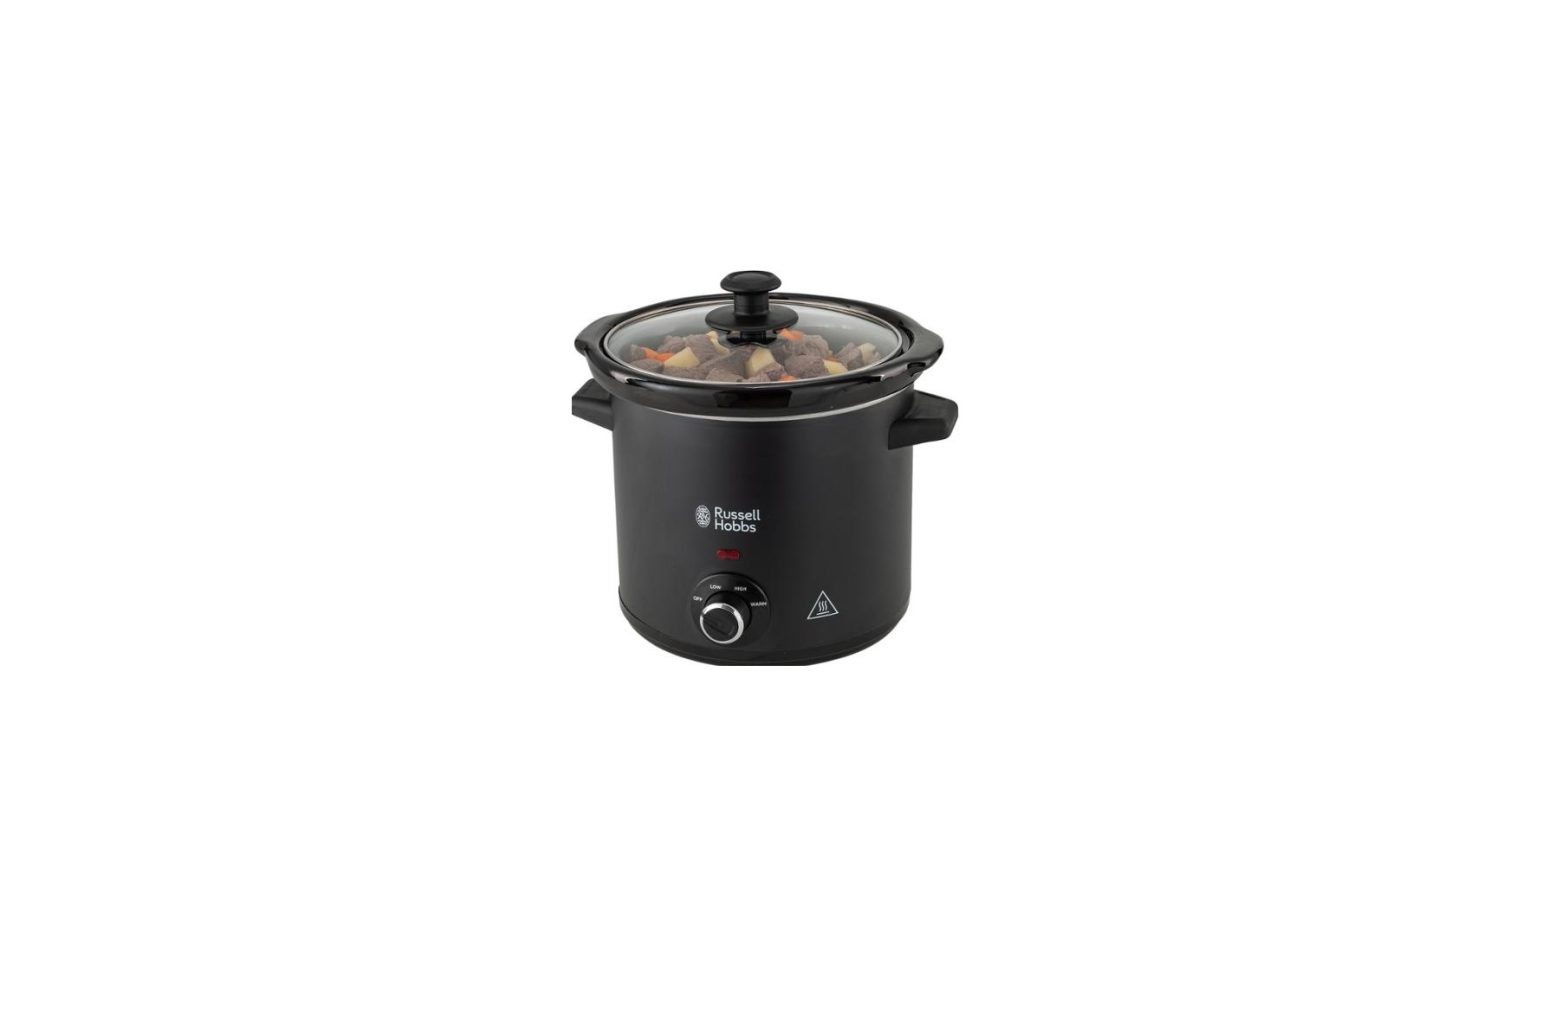 Russell Hobbs 24180-56 Slow Cooker User Manual